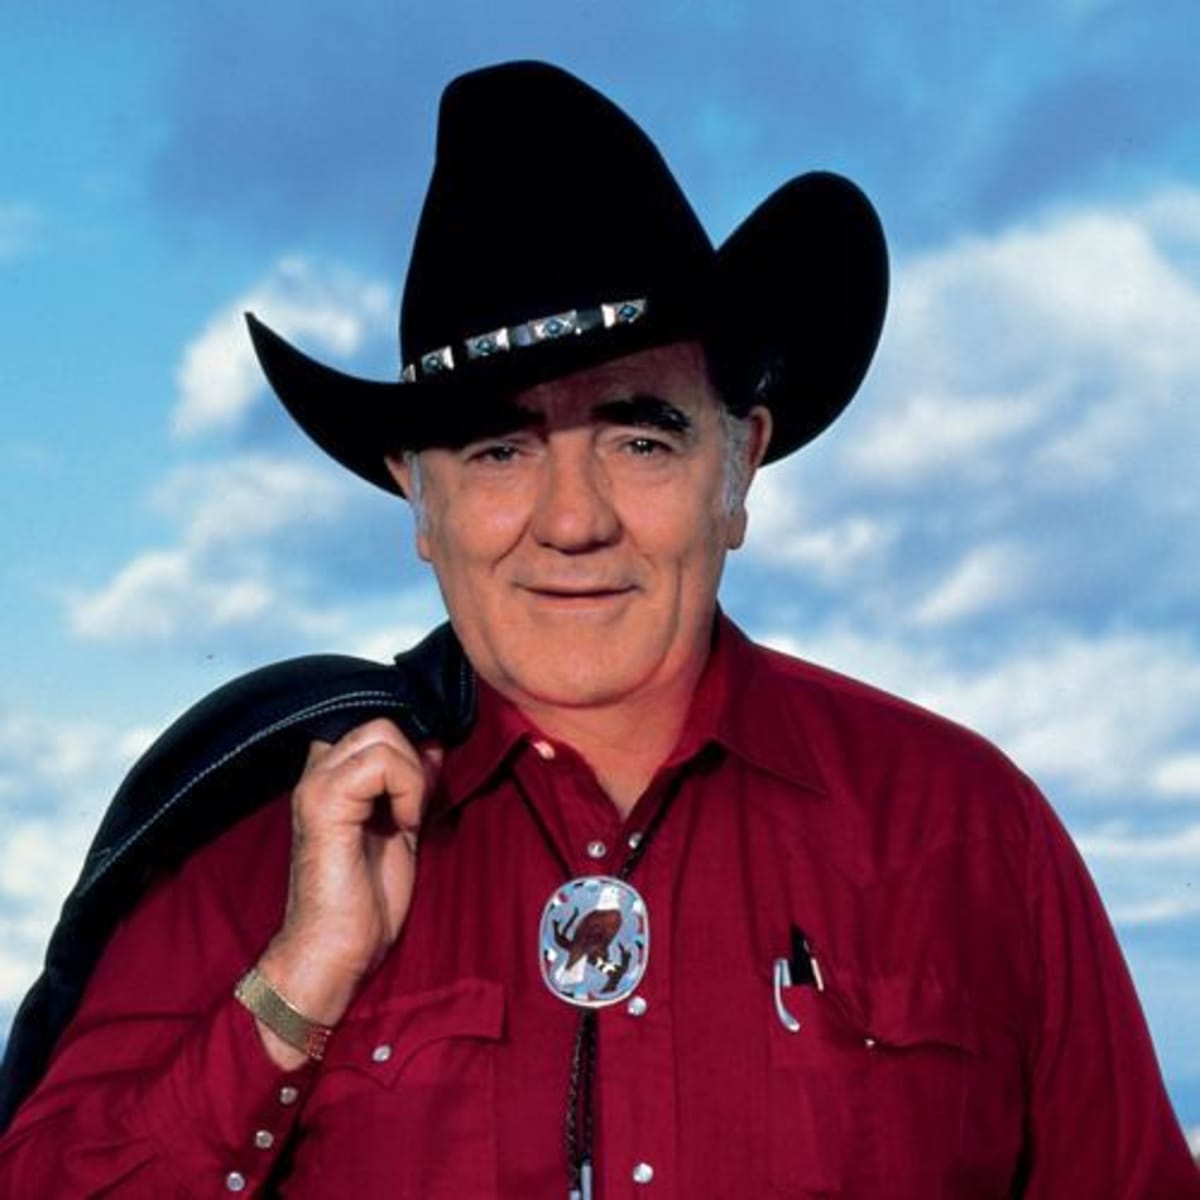 Louis L'Amour: Author of Some of the Best Westerns - HubPages